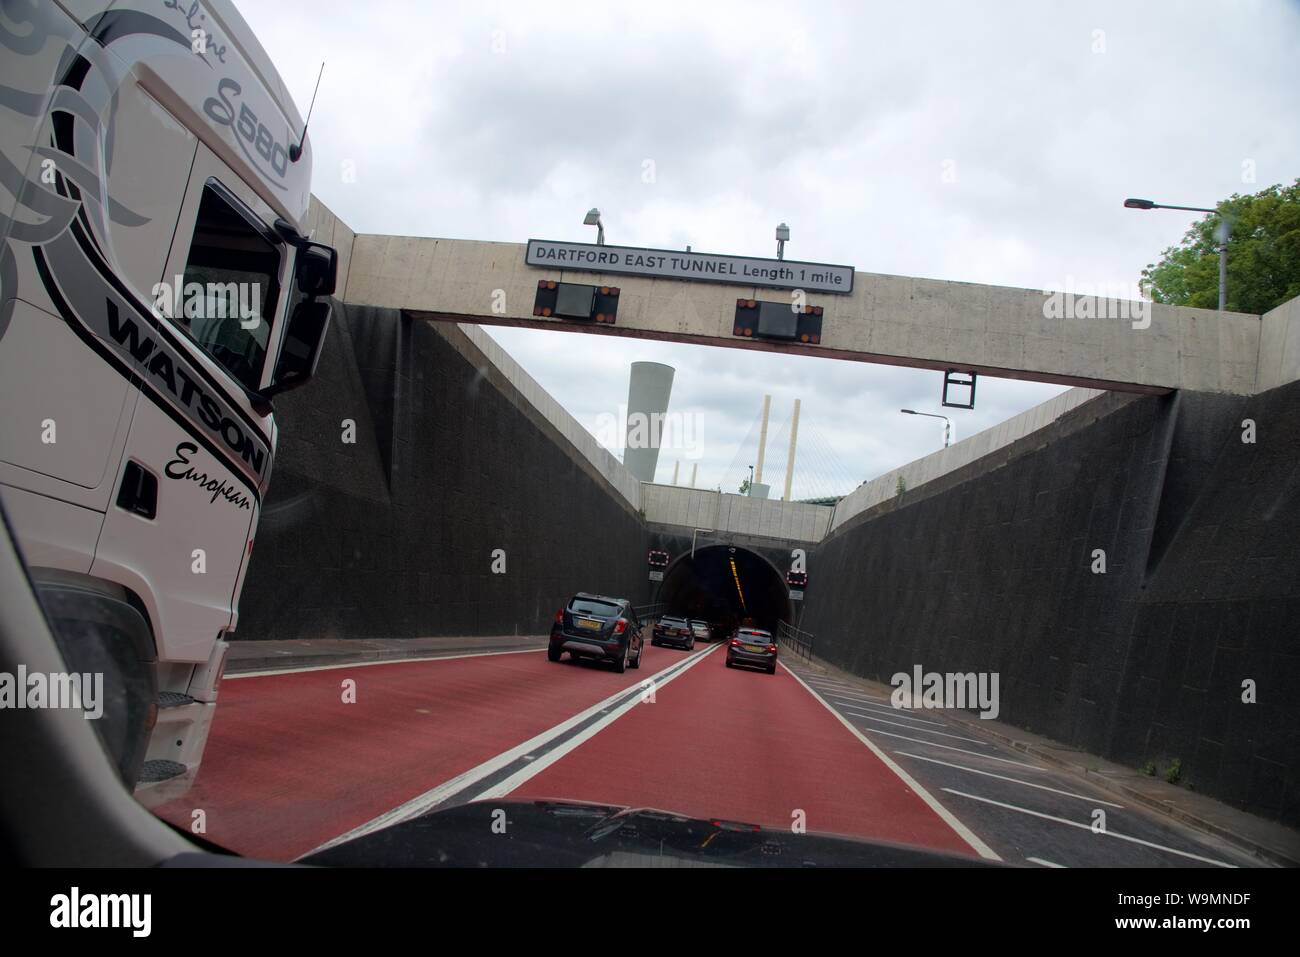 Dartford, Kent/UK-May 31 2019: approaching the south entrance of the Dartford east tunnel underneath the Thames and heading north in to Essex from Ken Stock Photo